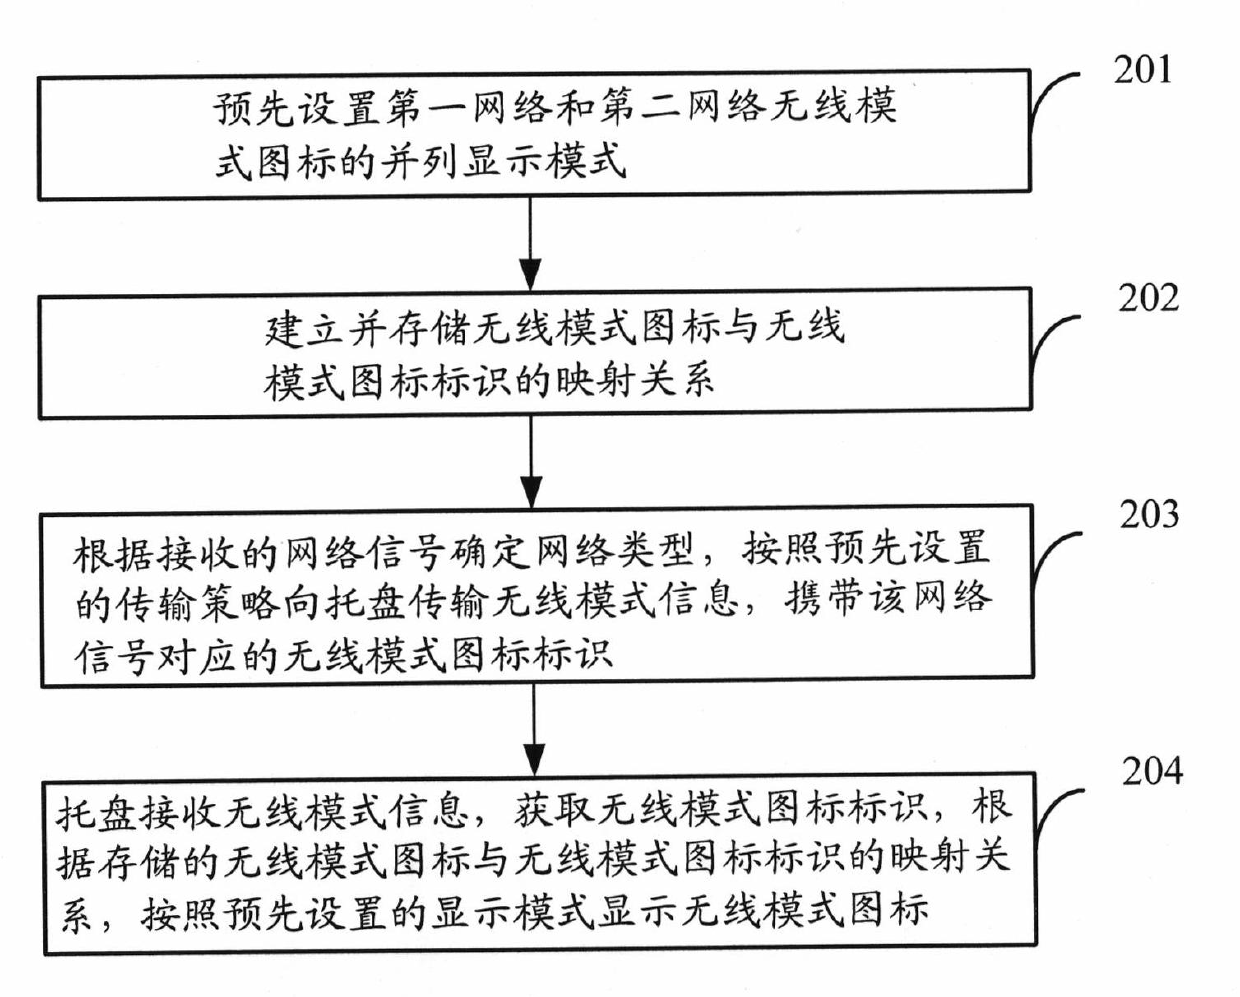 Method for transmitting wireless mode information of mobile communication terminal, as well as mobile communication terminal